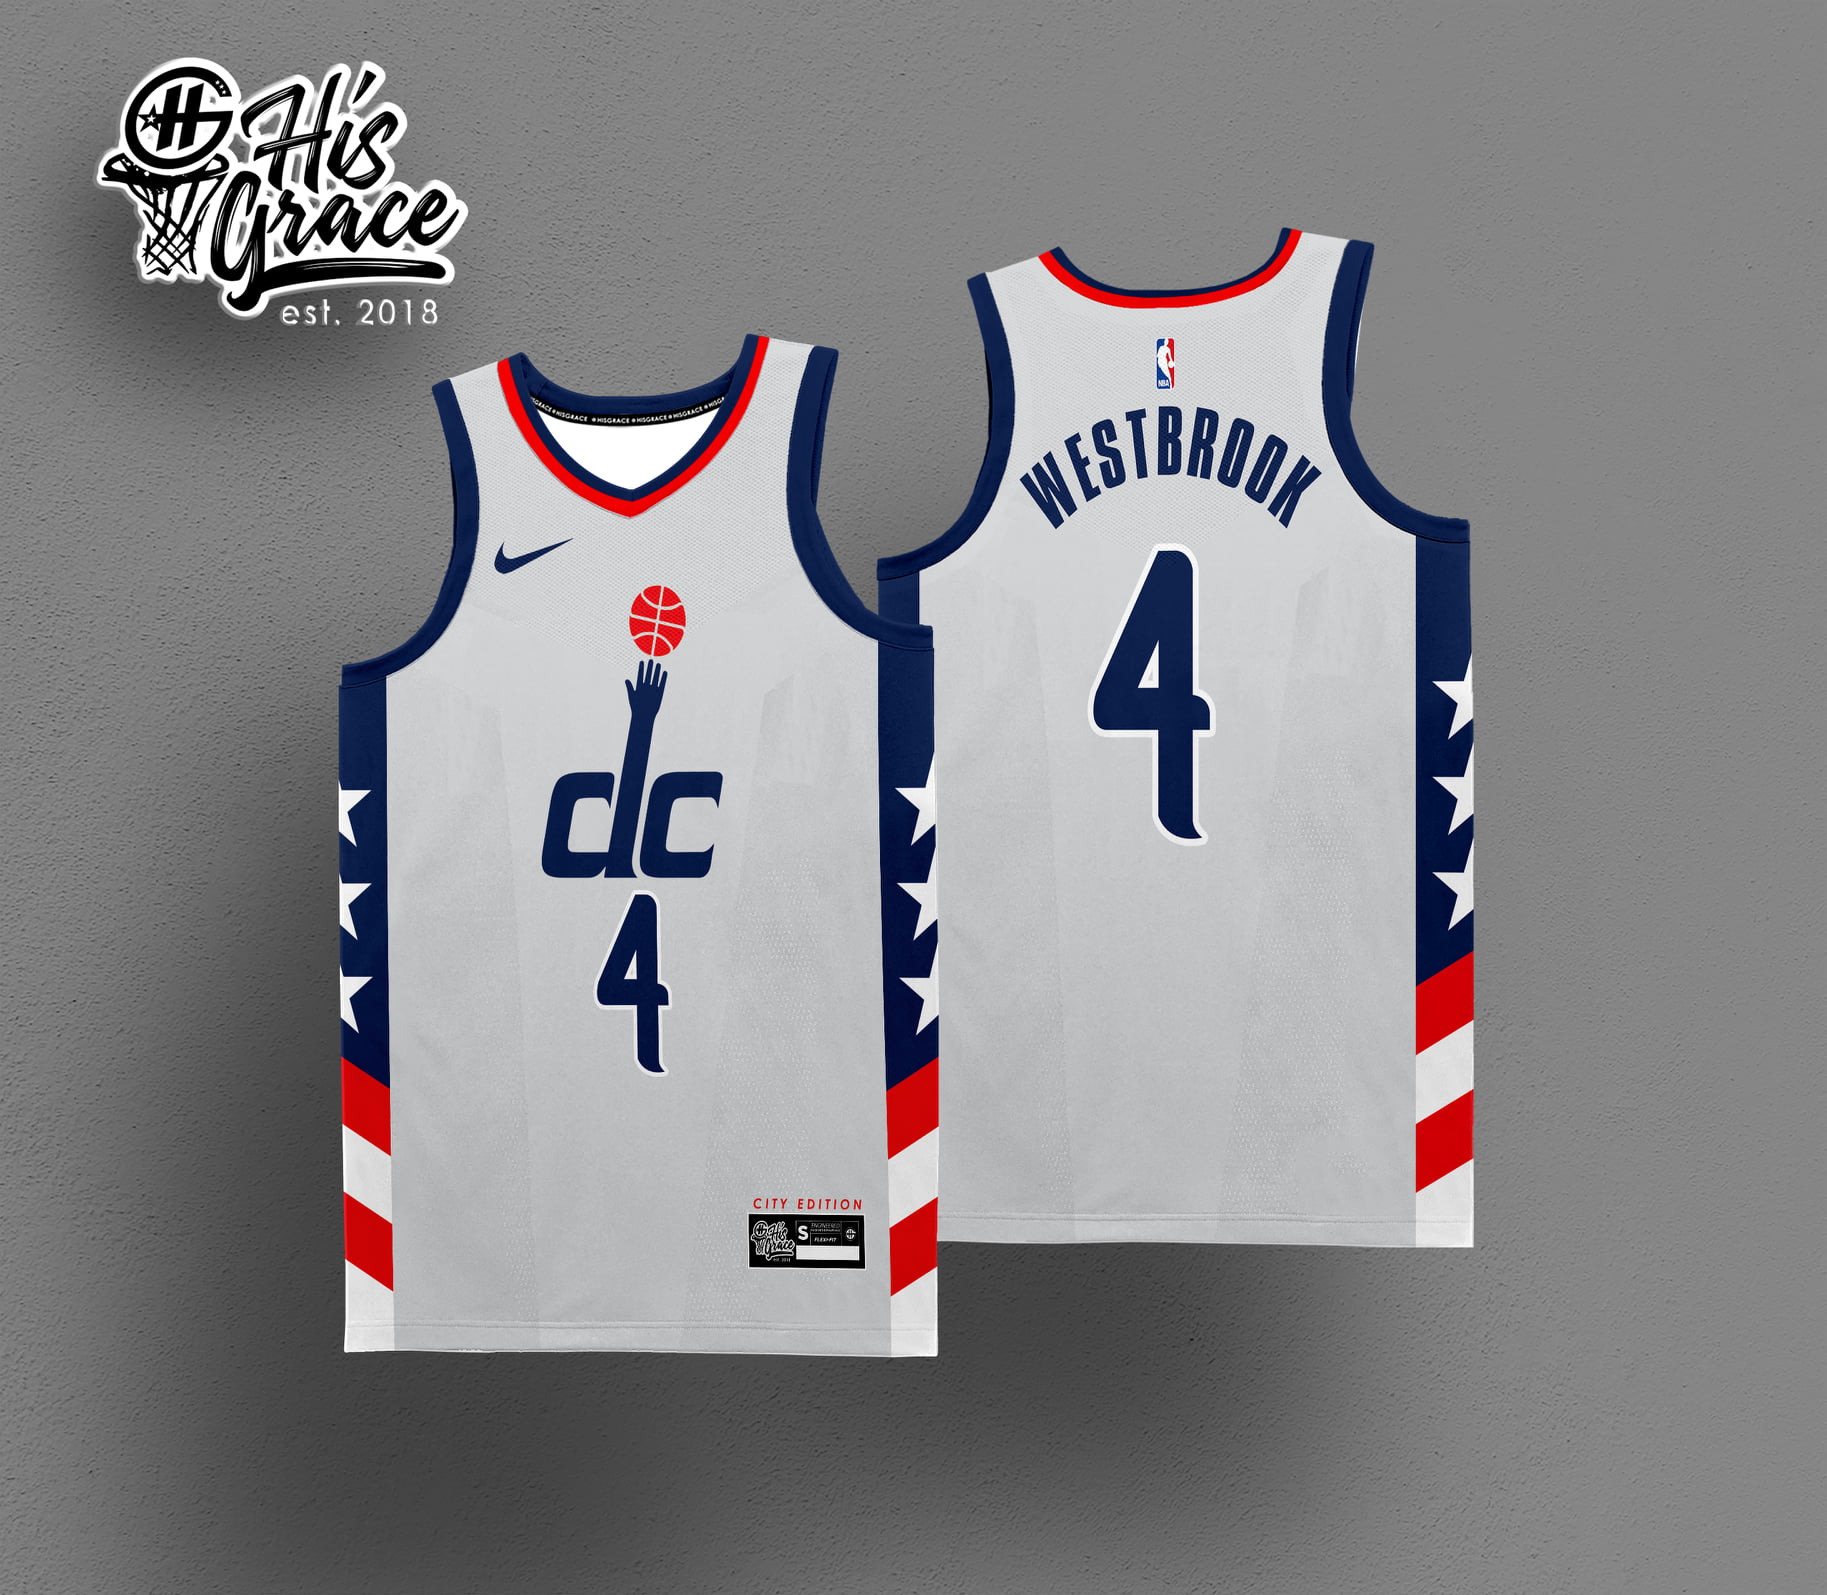 75th Anniversary New Orleans Pelicans Williamson#1 White NBA Jersey -  Kitsociety